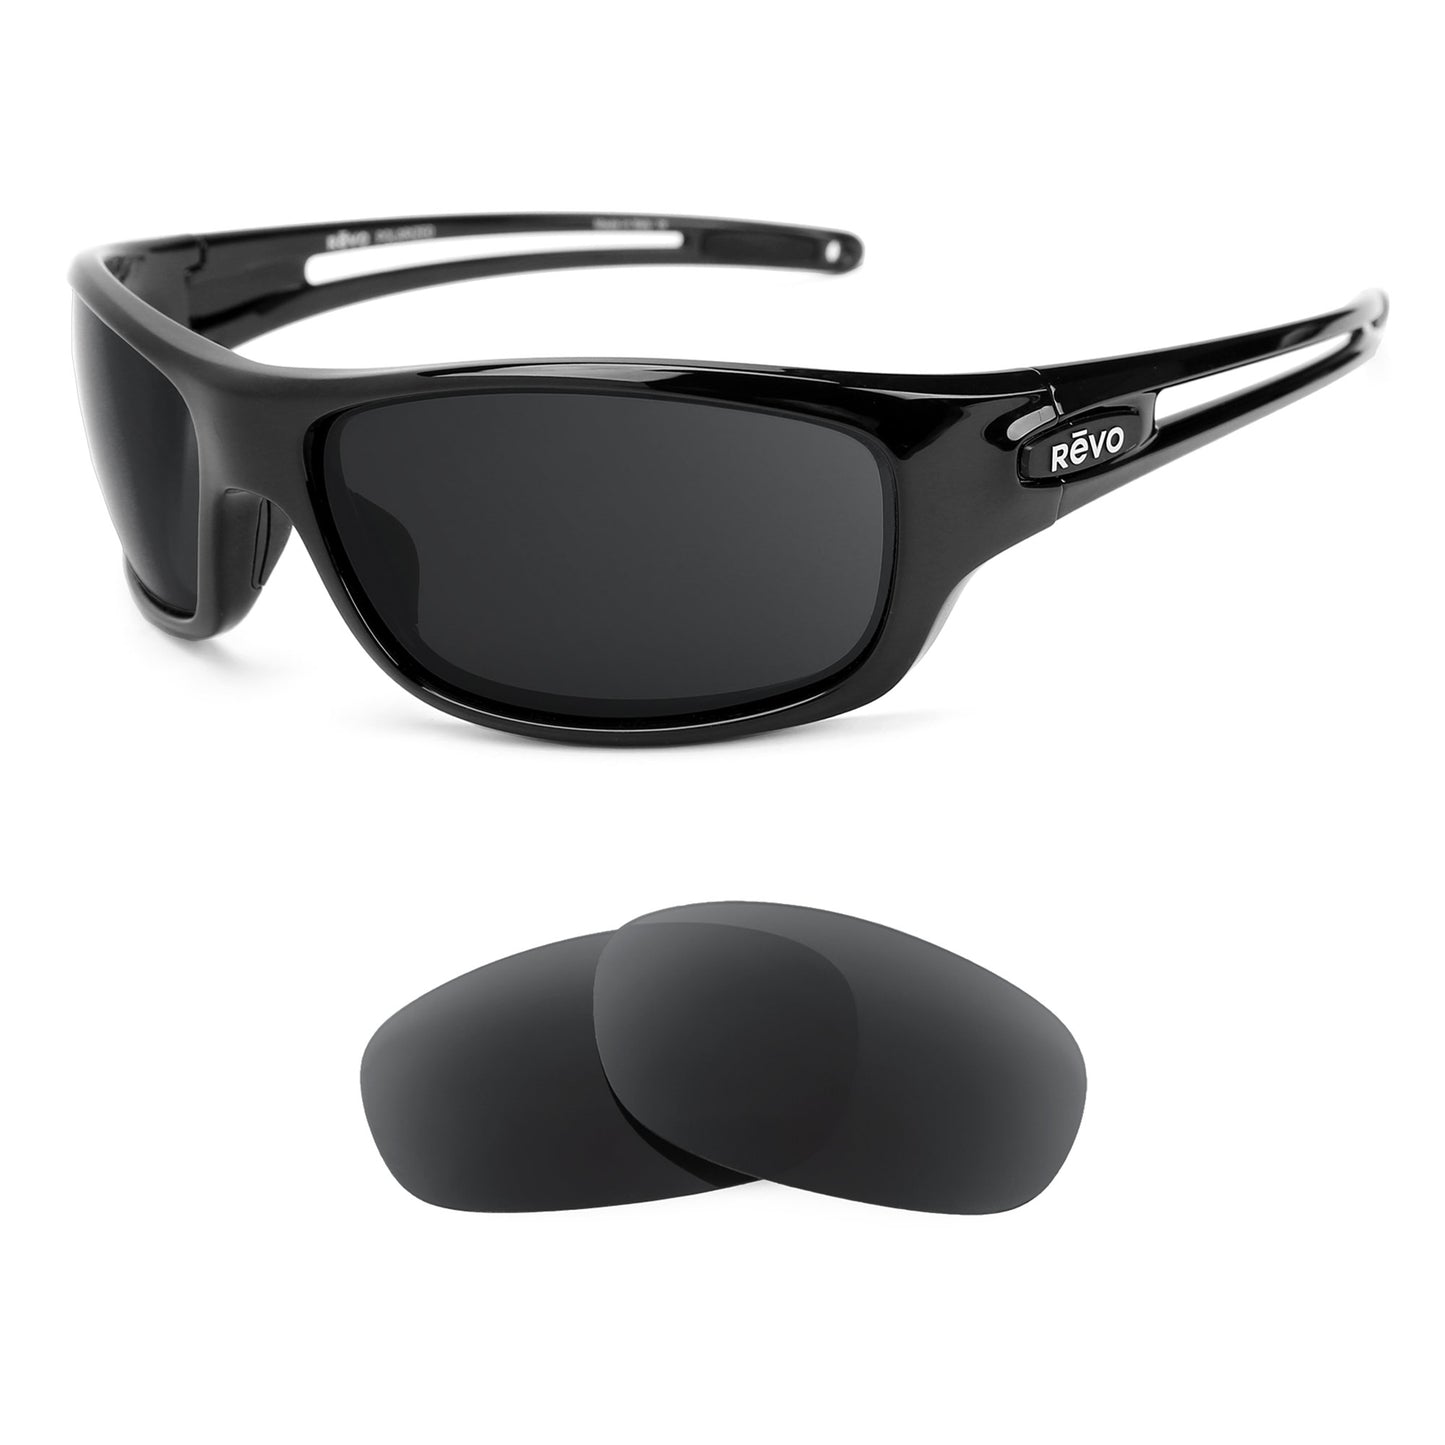 Revo Guide S RE4070 sunglasses with replacement lenses